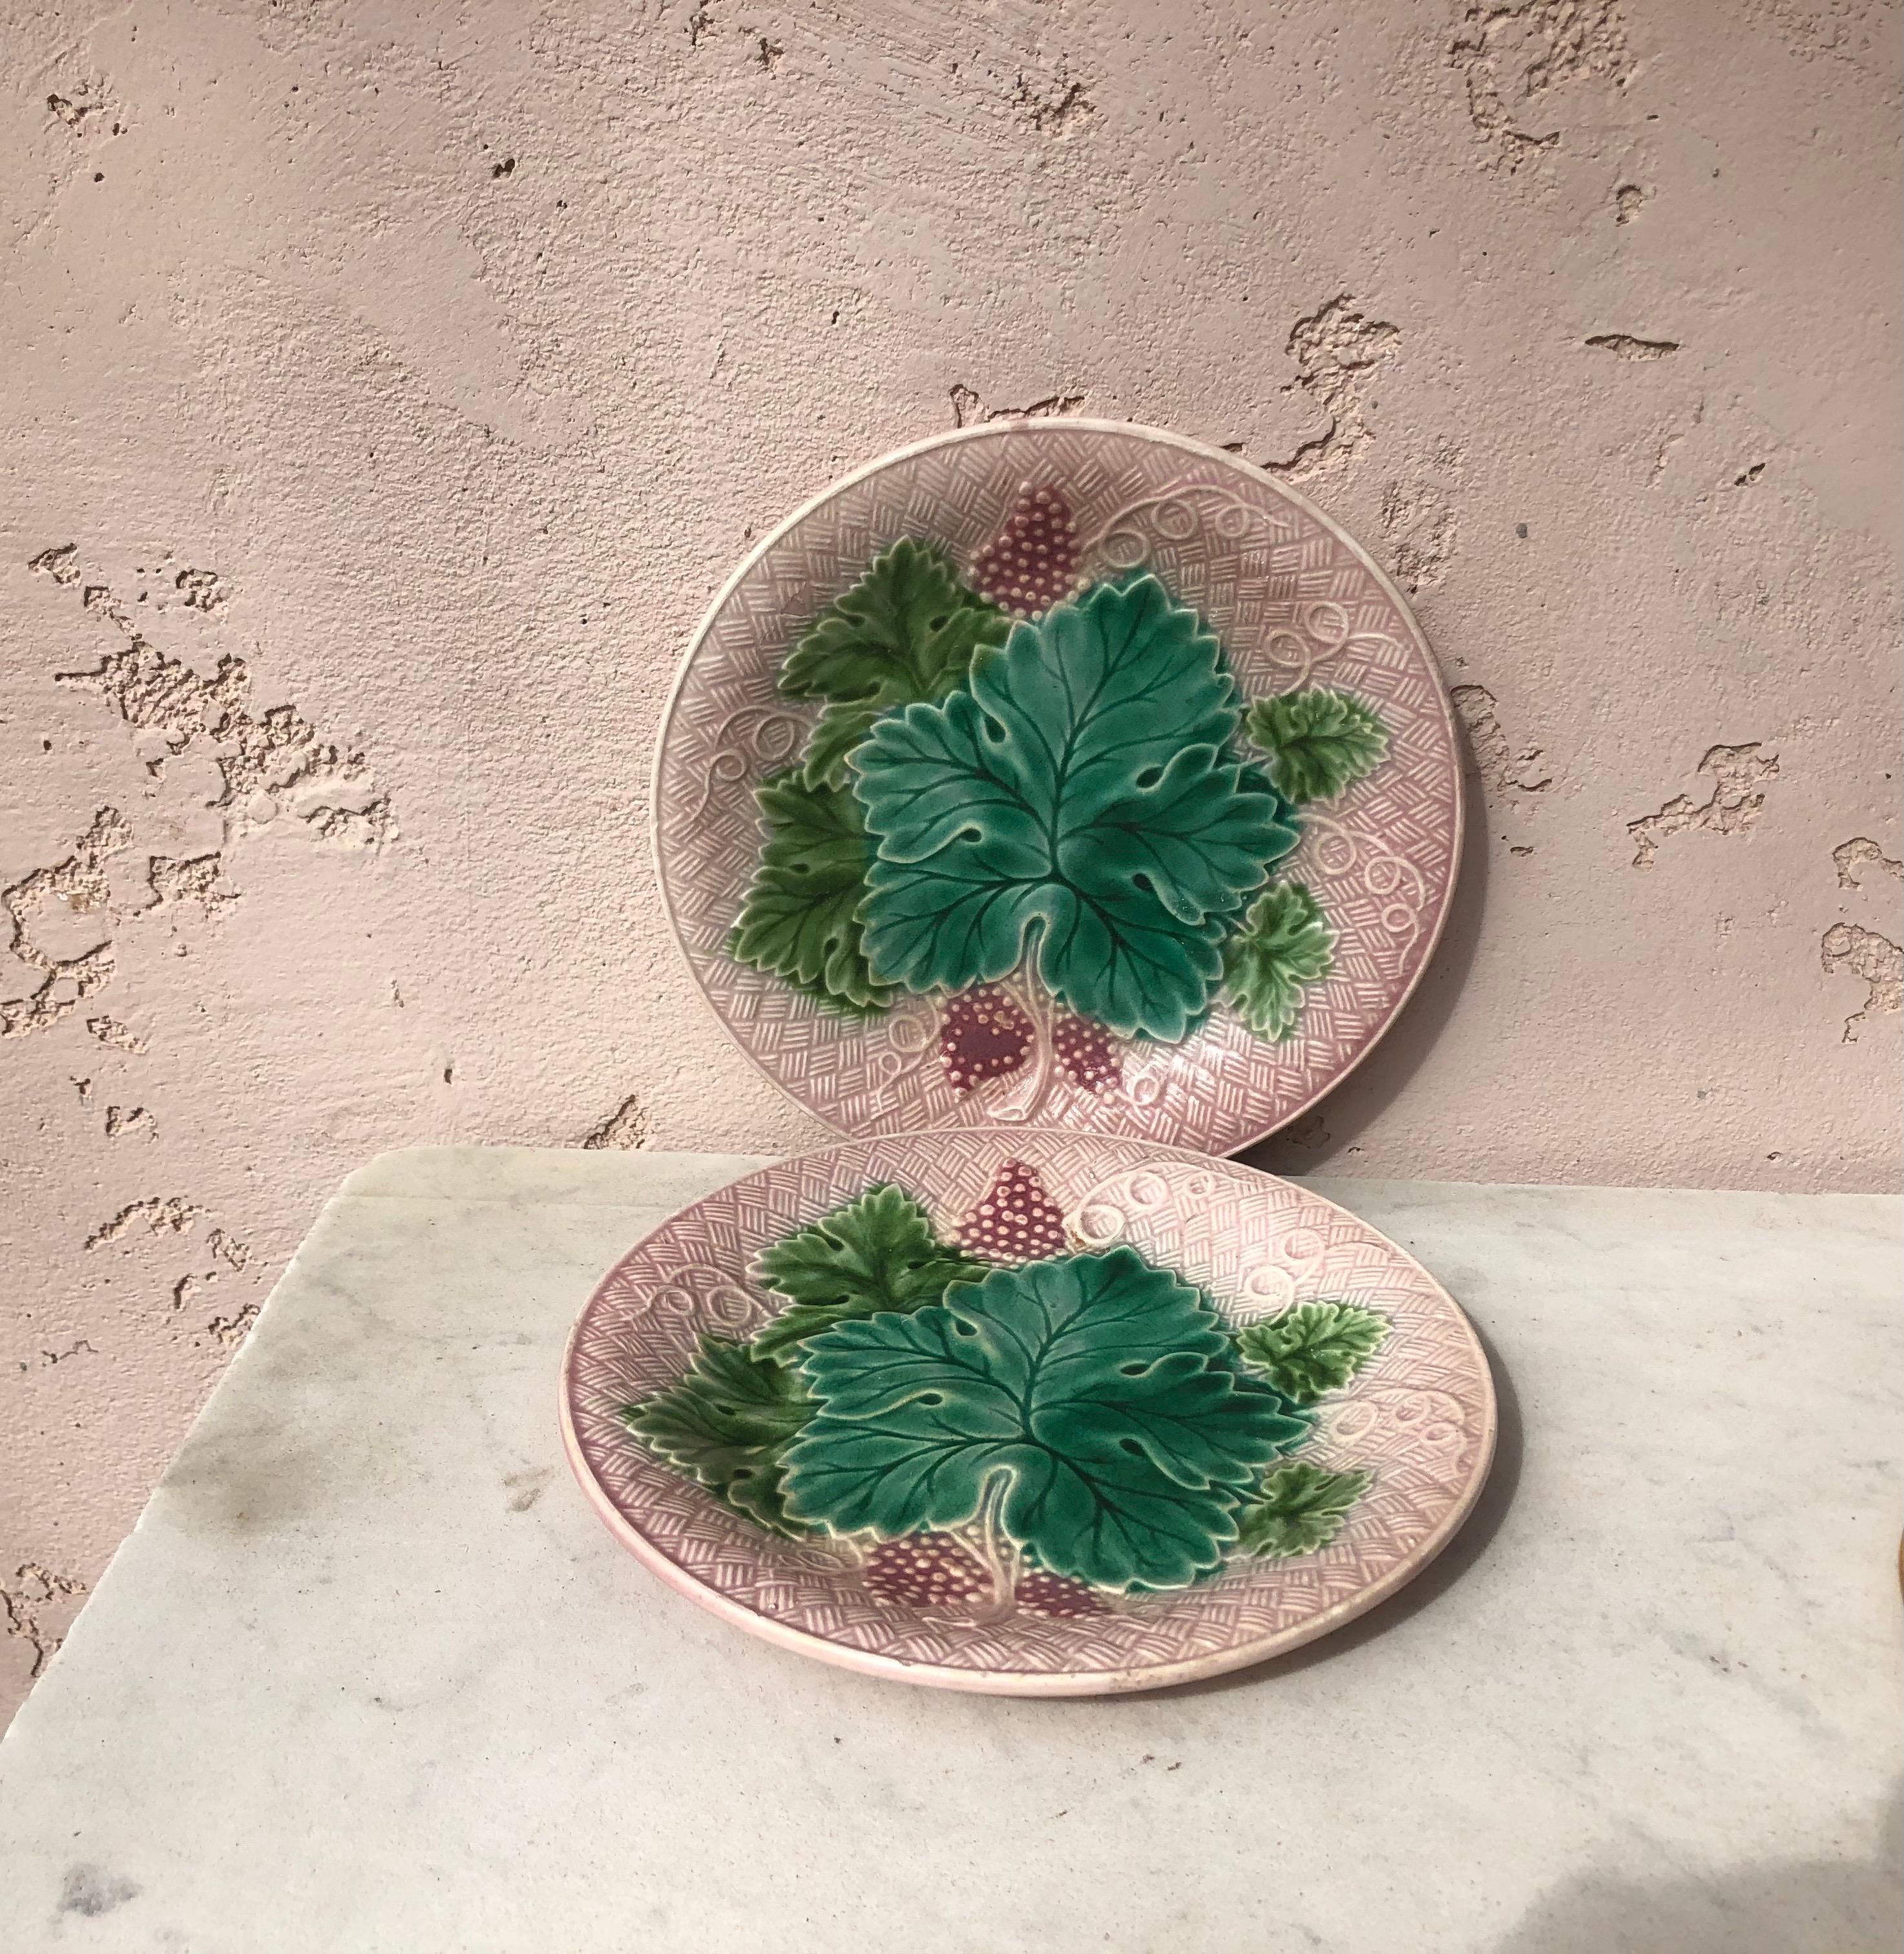 French Majolica grapes plate Salins on a pink background (East of France), circa 1890.